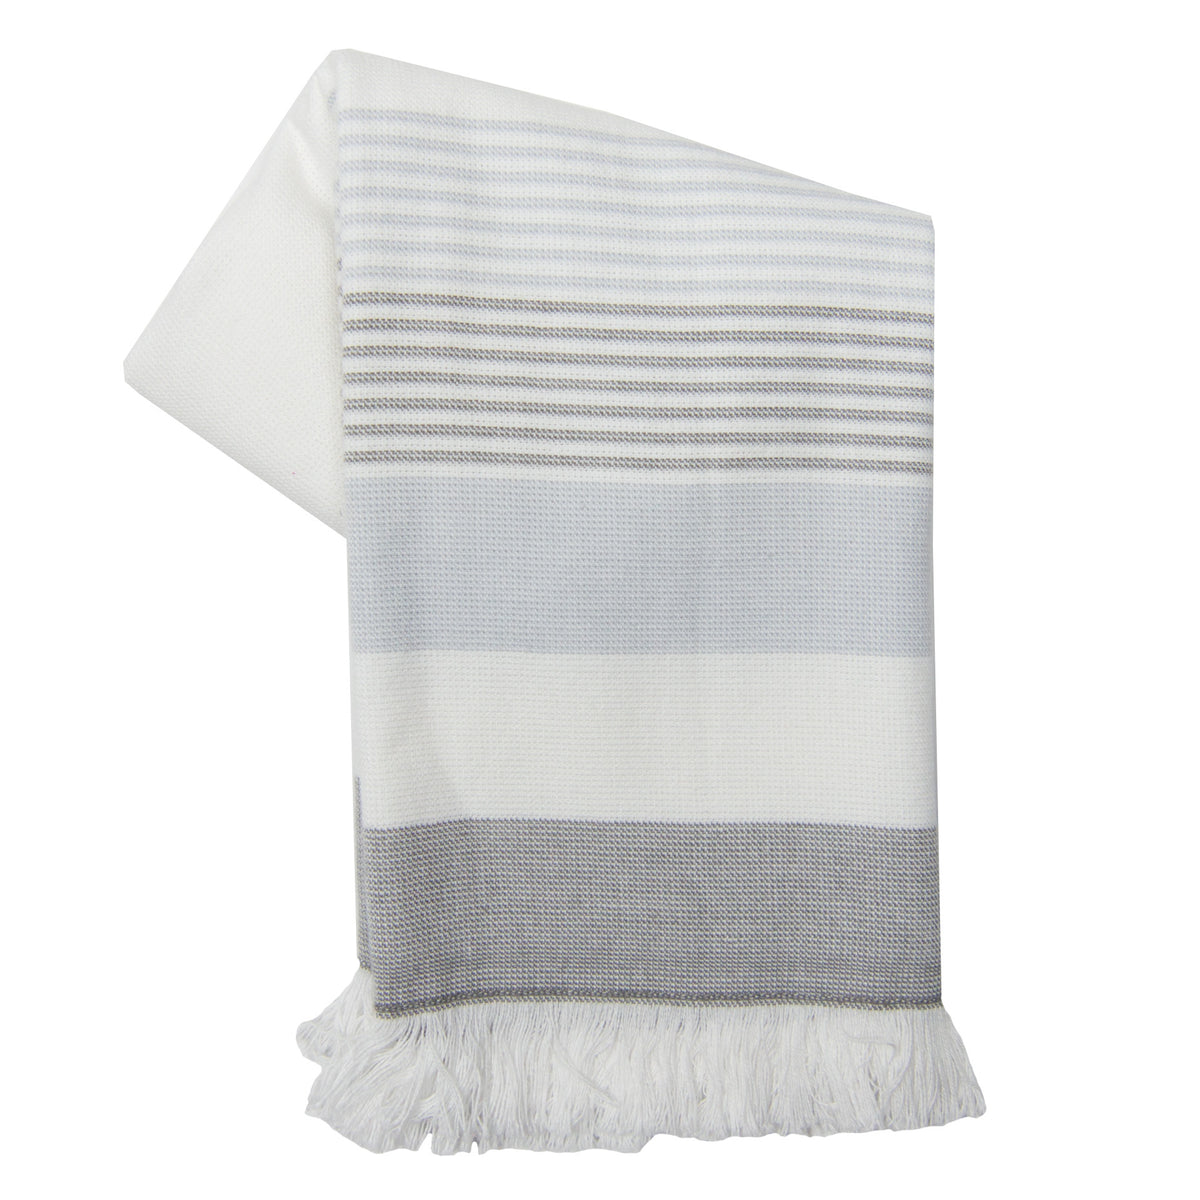 Tea Towel - Dunroven House Terry Cloth Striped Fringe Towel